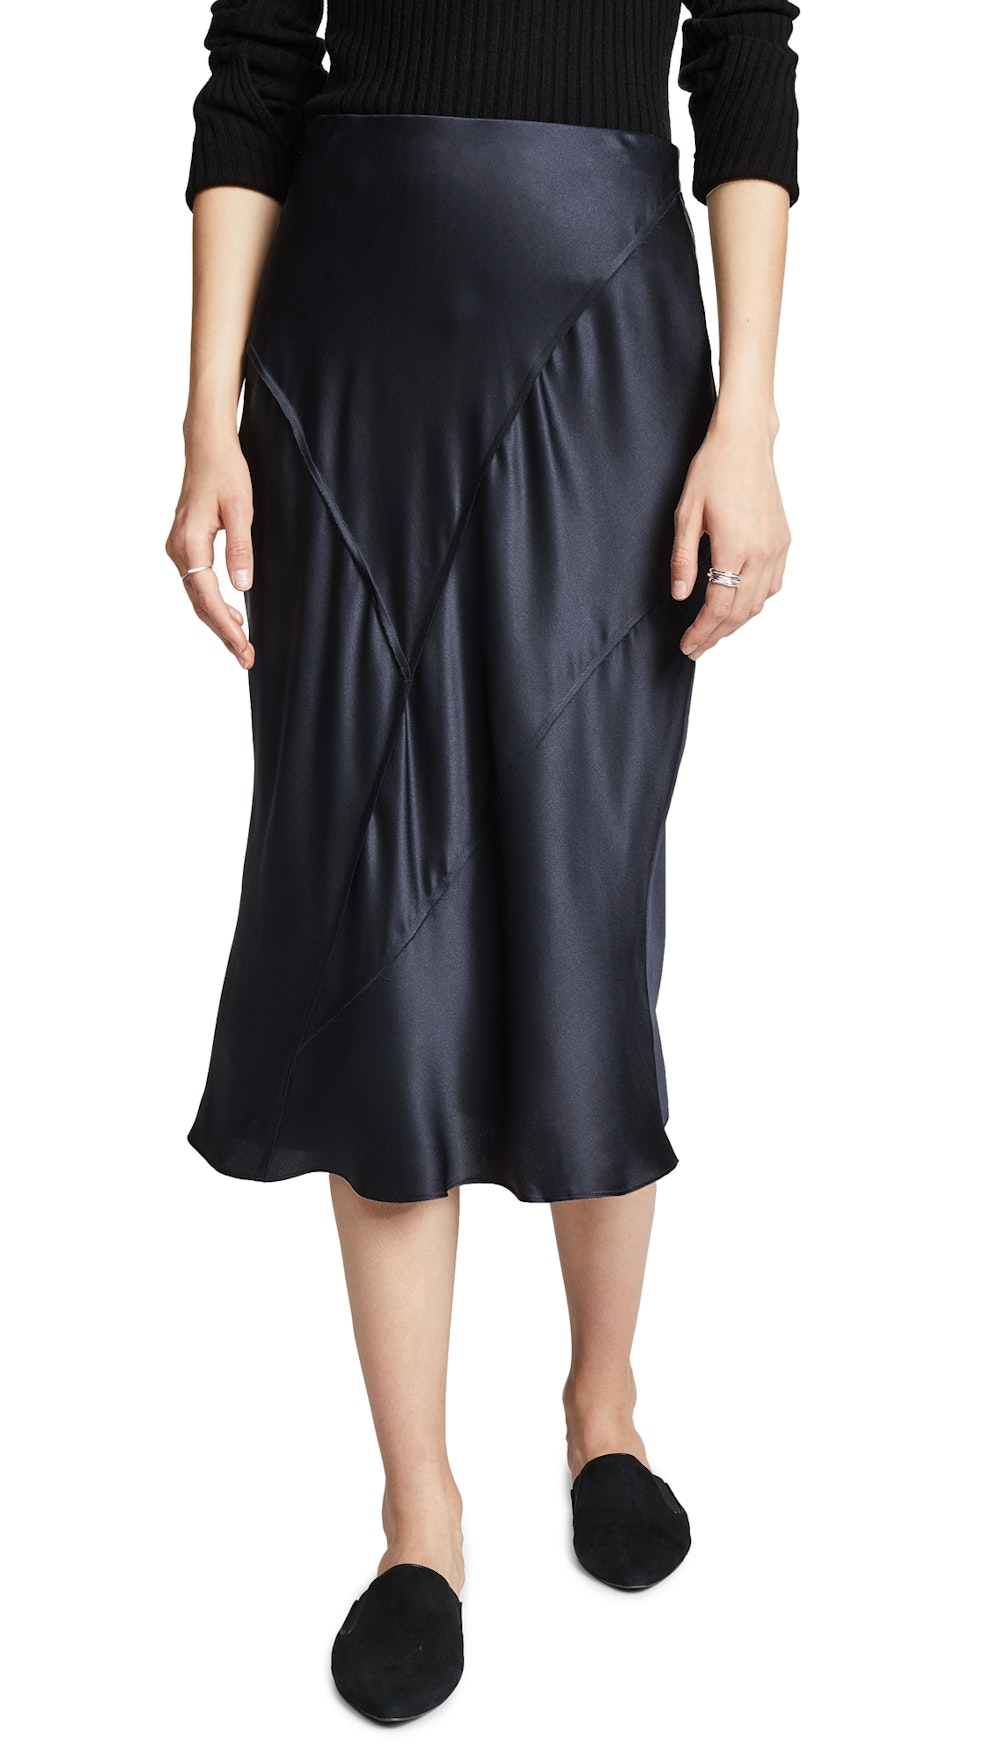 Wait, Everyone Is Wearing This Holy-Grail Realisation Par Skirt ...